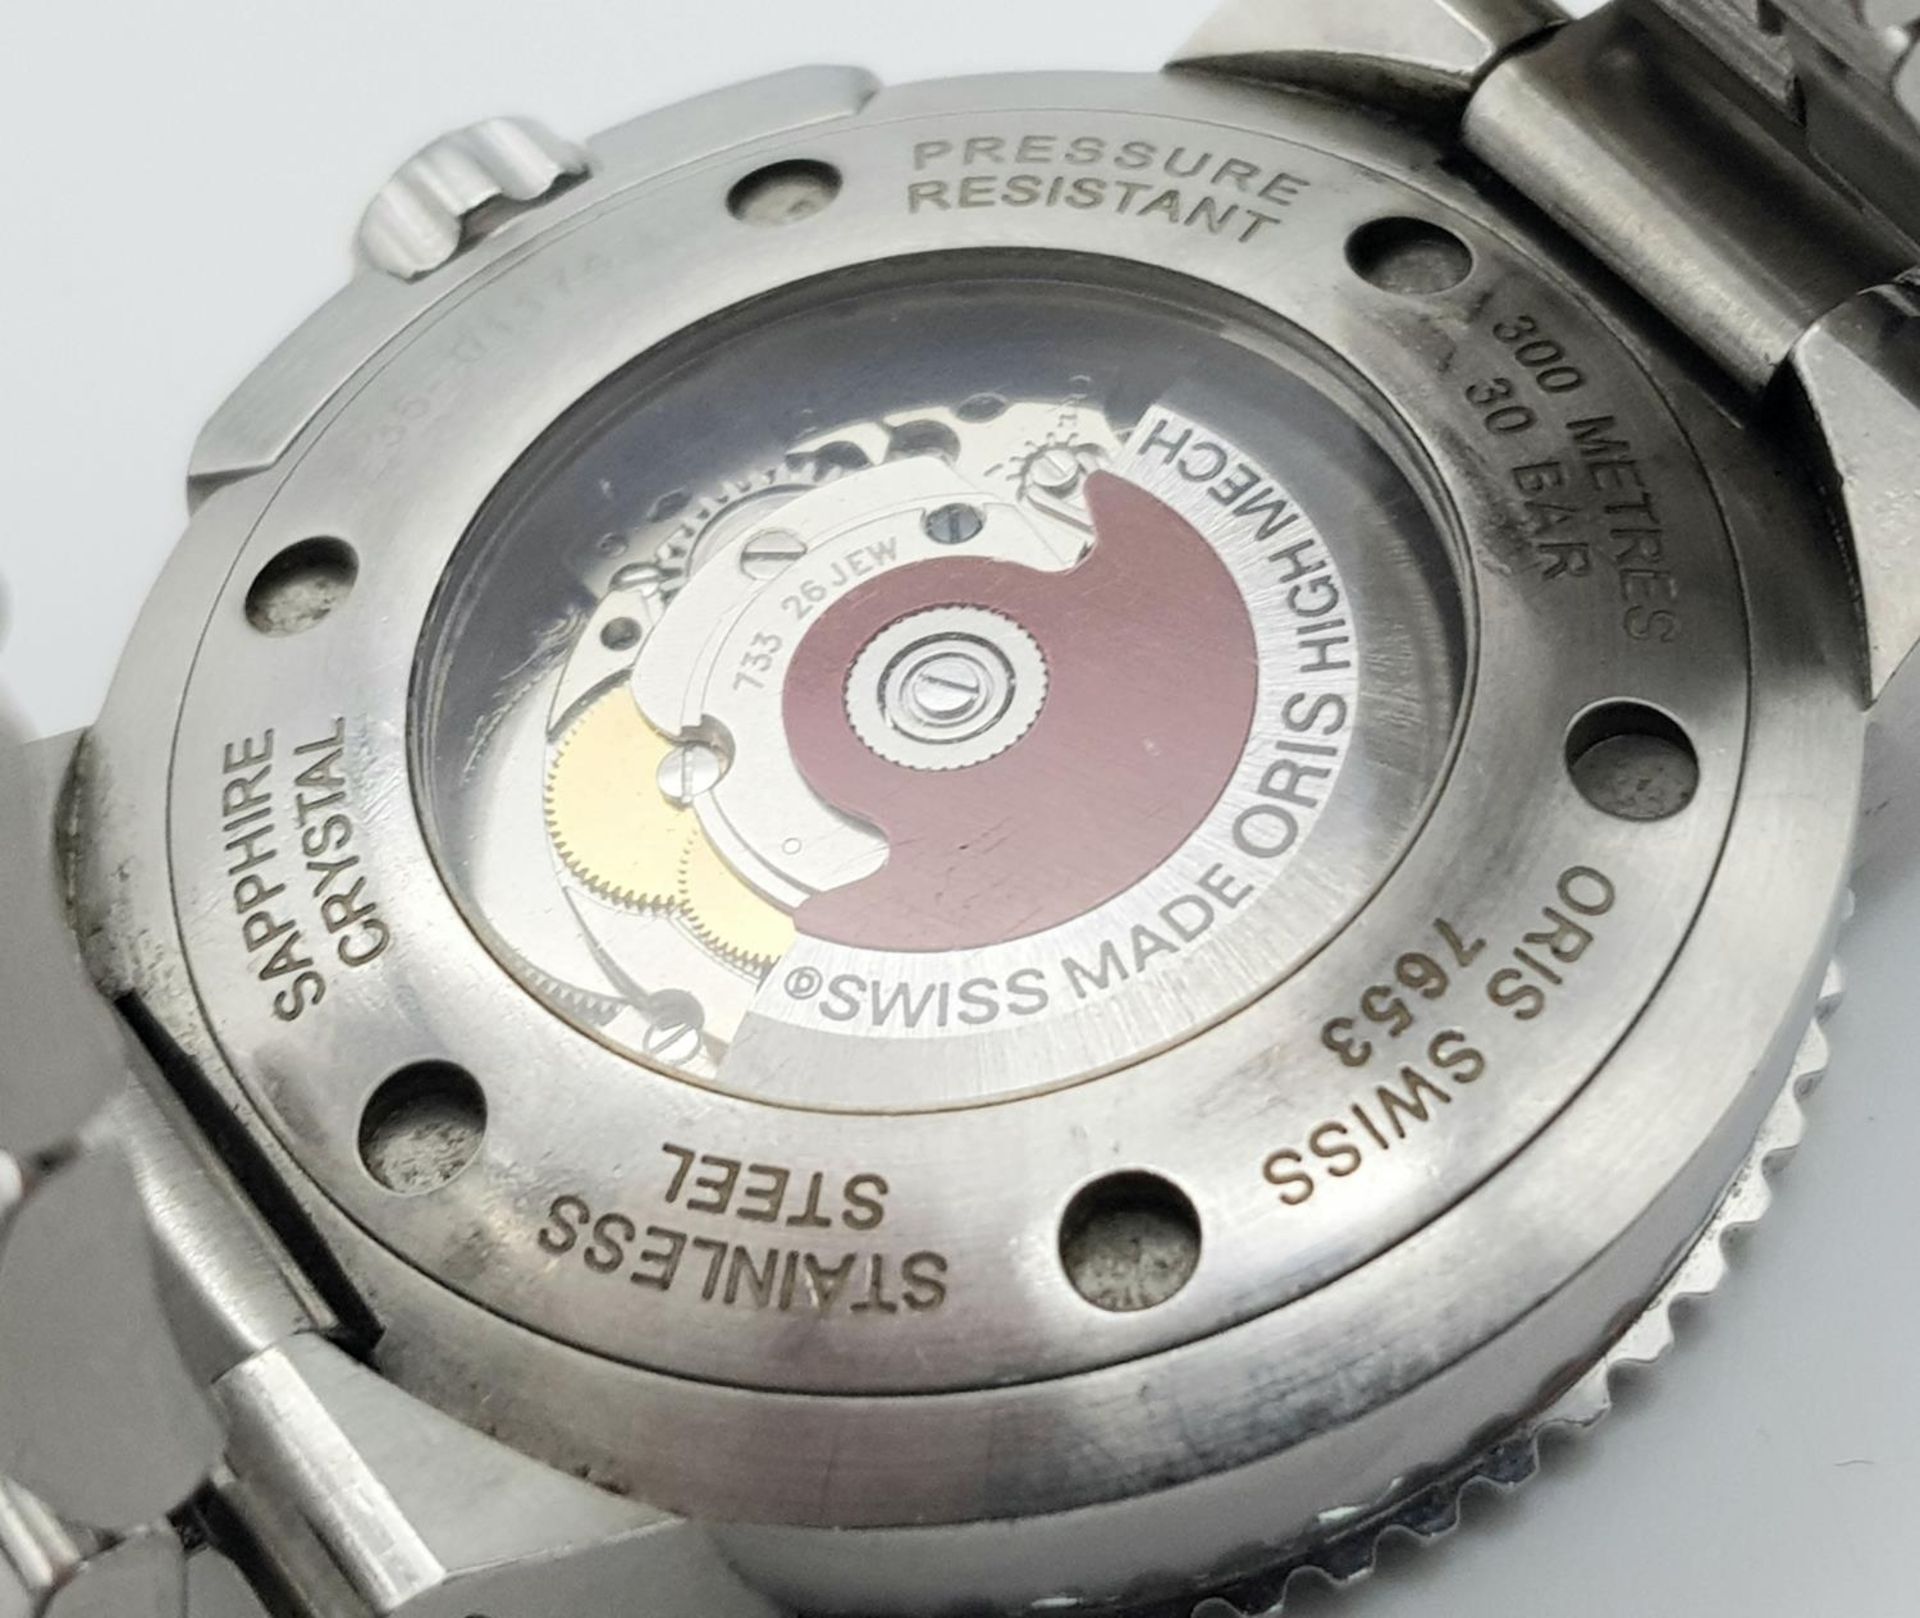 An Oris Automatic Divers Watch. Pressure resistant to 300M - Model 7653. Stainless steel bracelet - Image 7 of 8